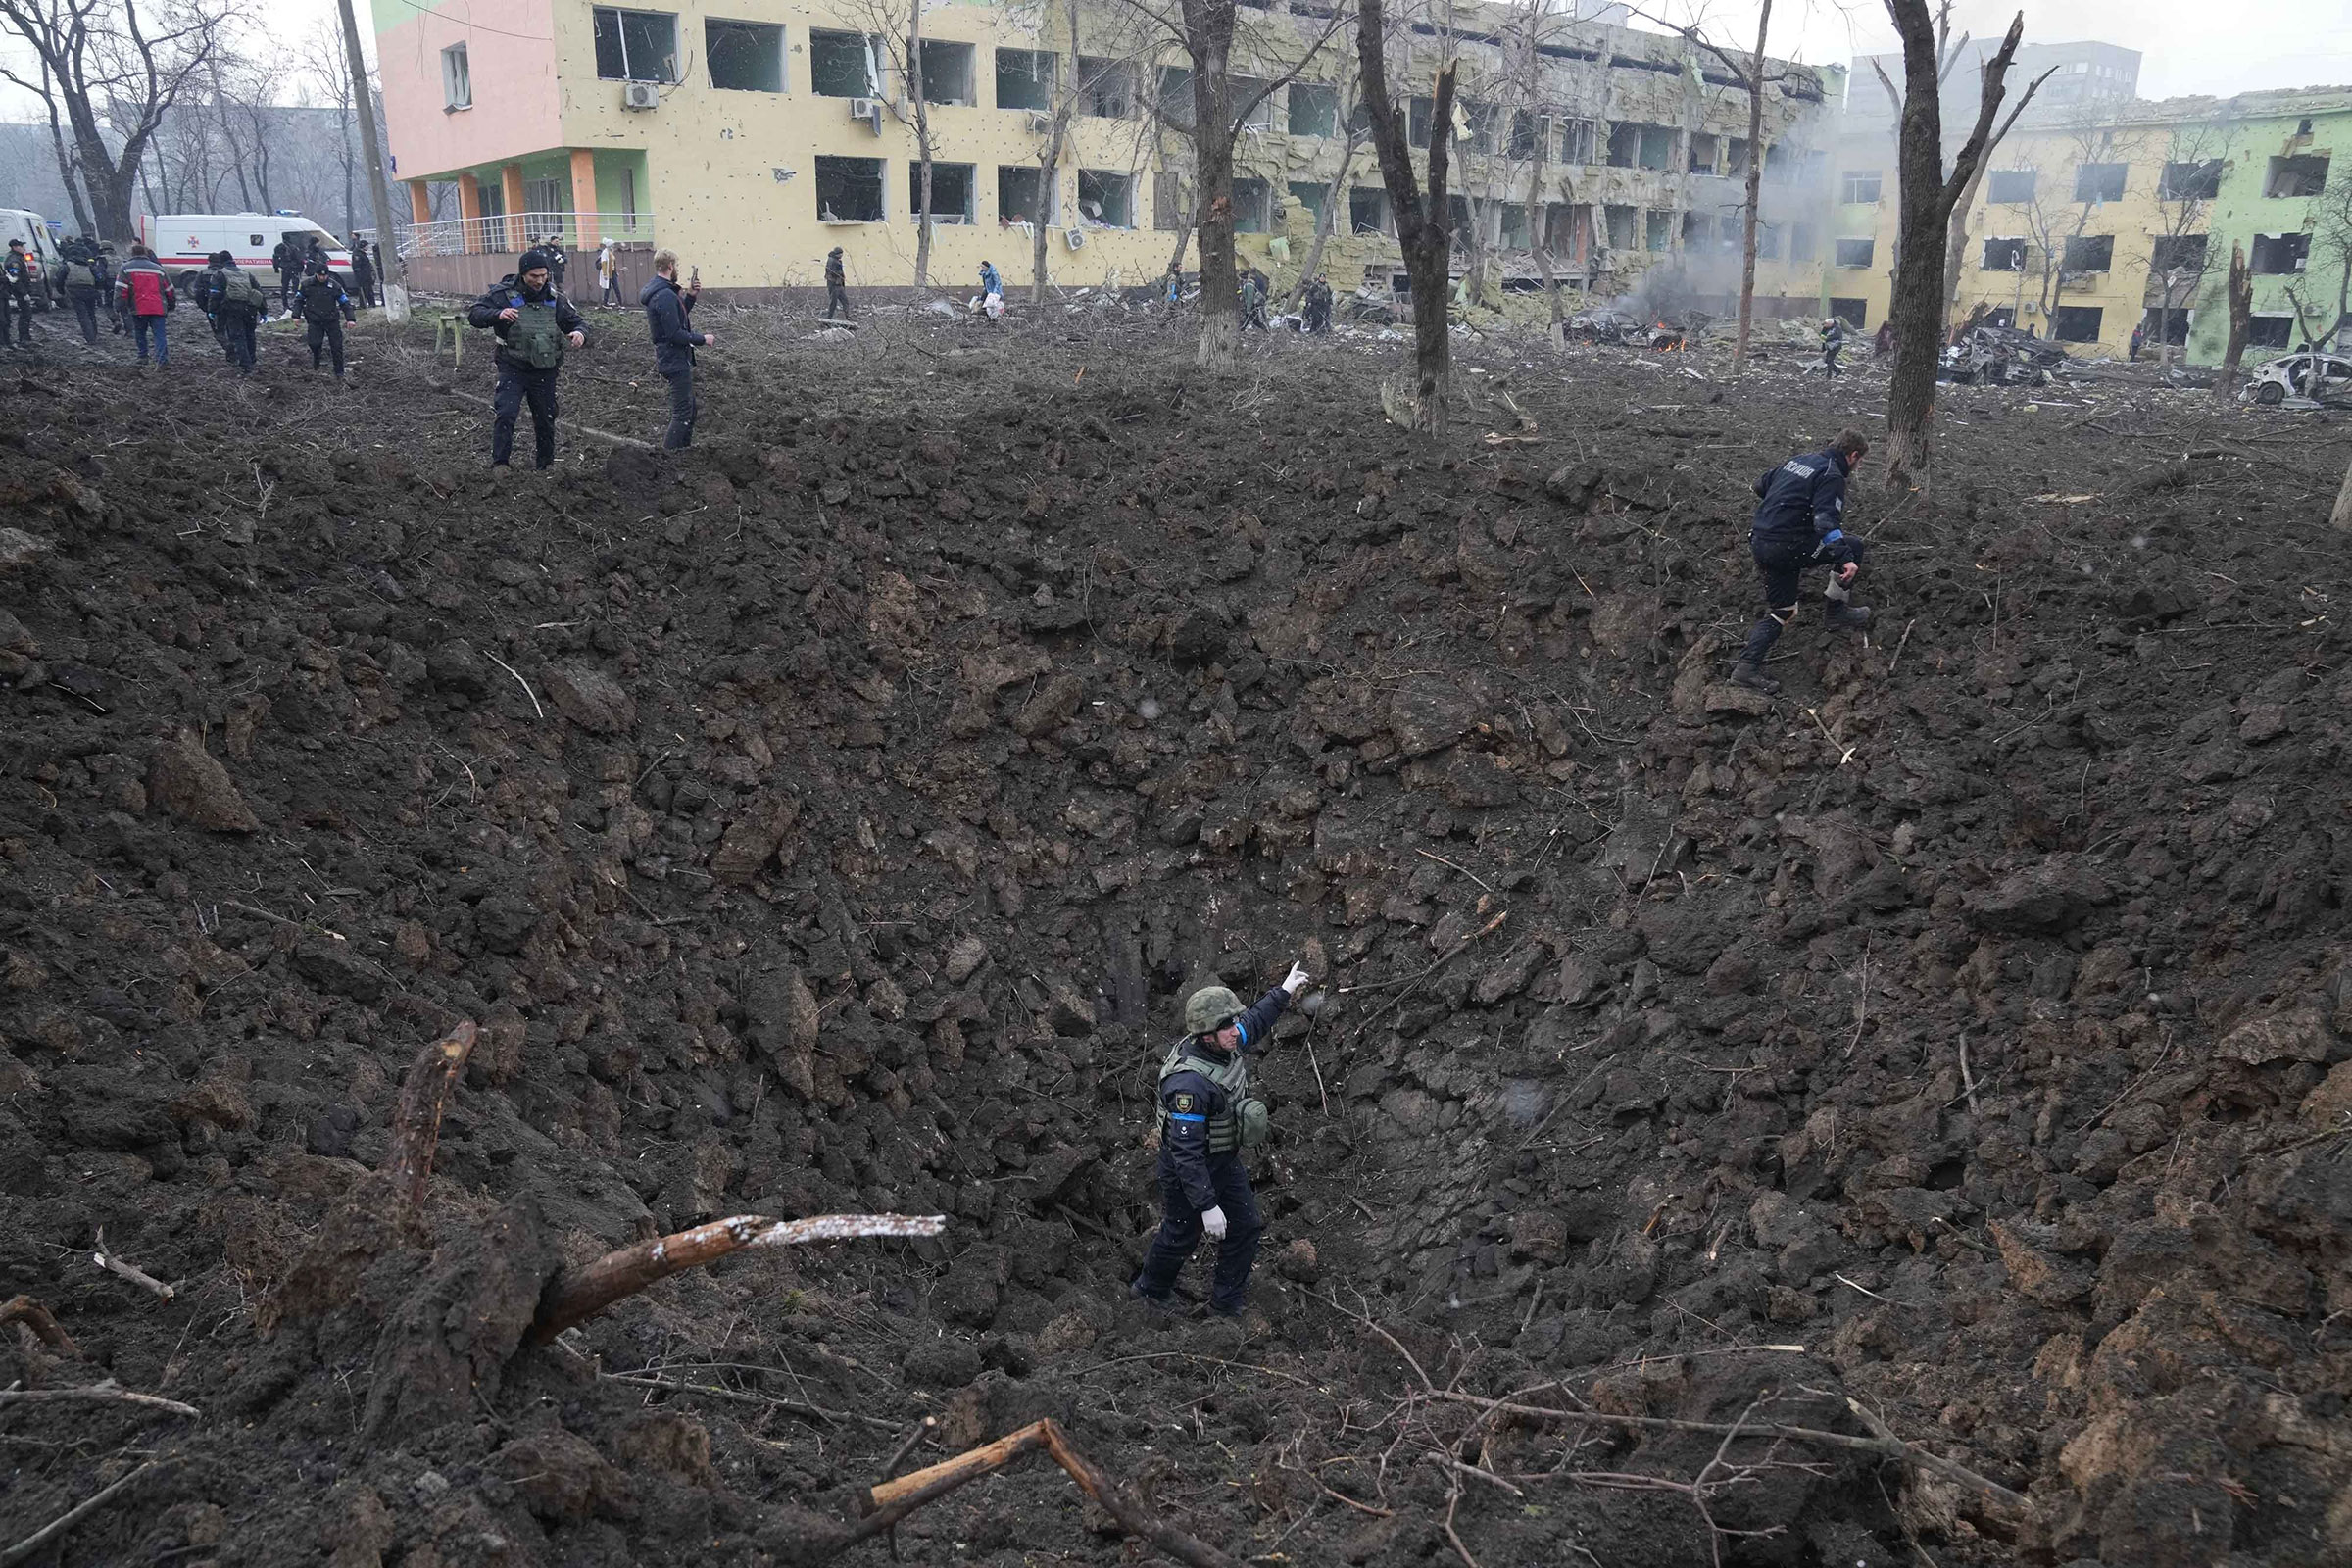 Ukrainian soldiers and emergency employees work at the site of the damaged maternity hospital in Mariupol on March 9. A Russian attack severely damaged the maternity hospital in the besieged port city of Mariupol.